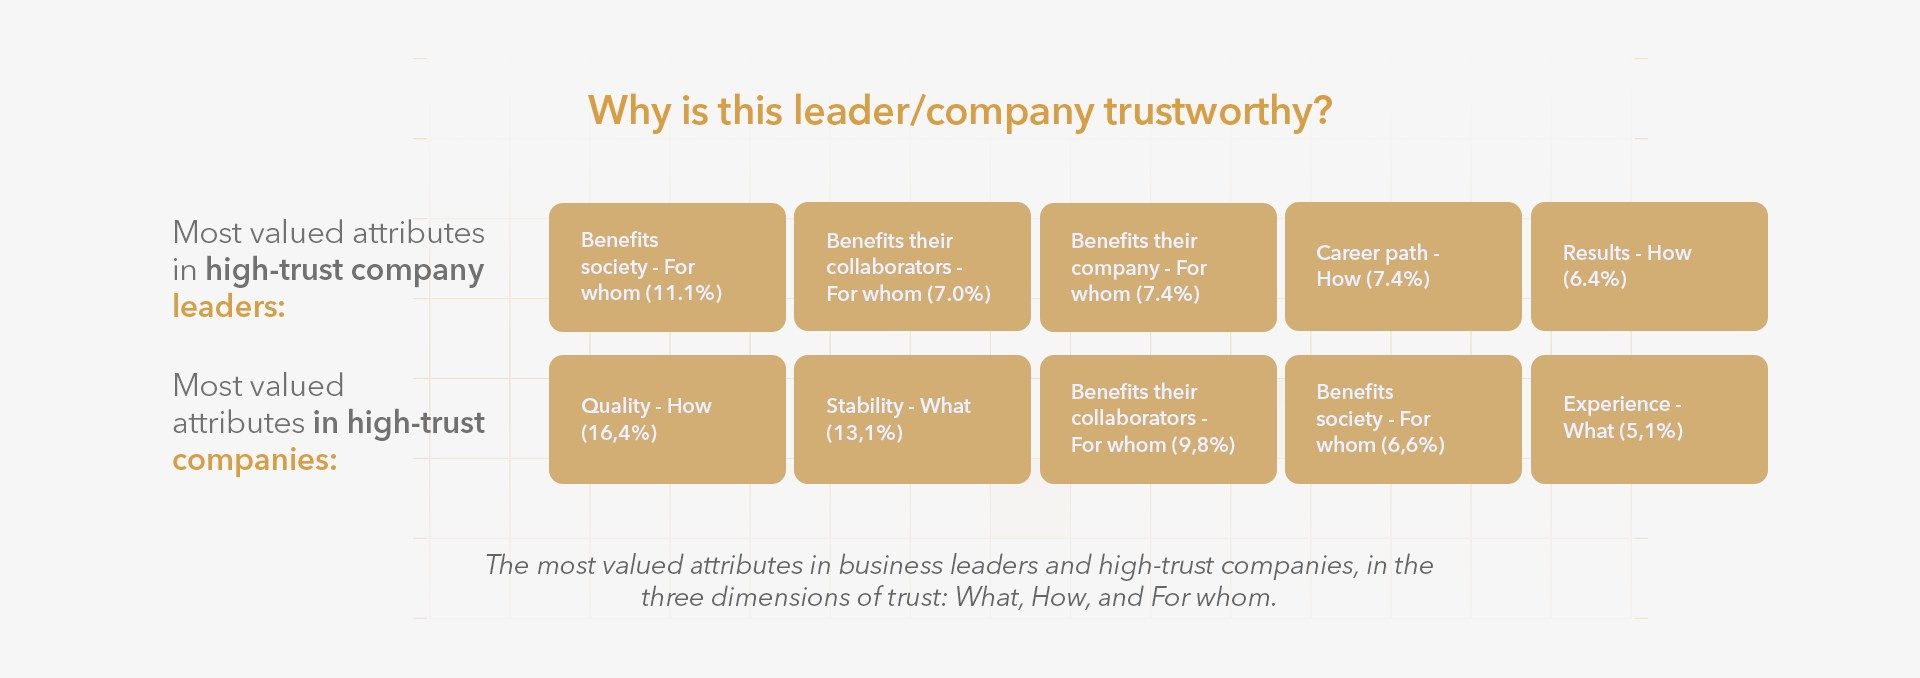 A graphic that quantifies the most valued attributes in high-trist company leaders and companies, according to the E&N survey "Reputation in Central America: The value of trust".